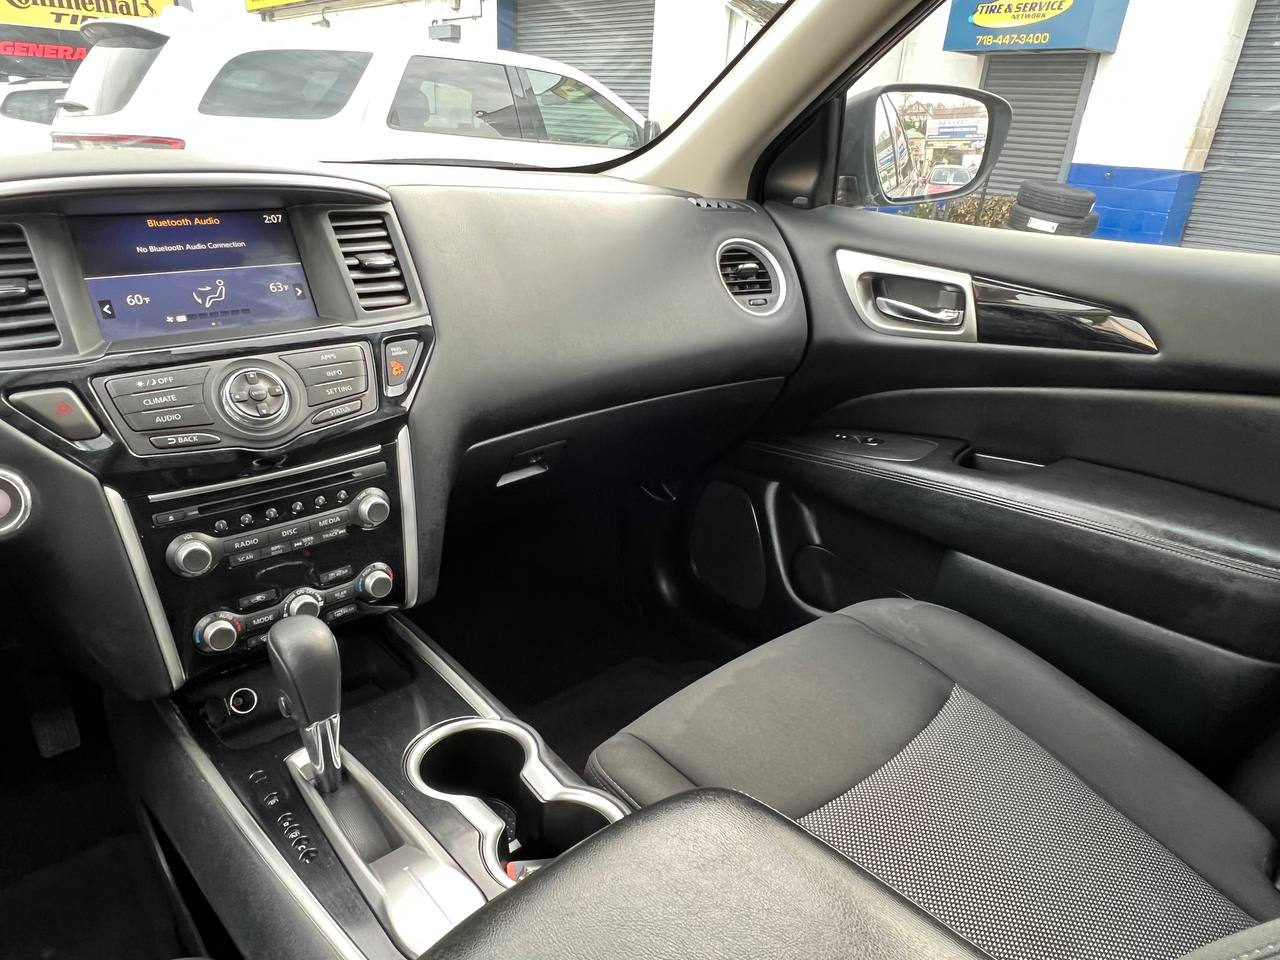 Used - Nissan Pathfinder SV SUV for sale in Staten Island NY